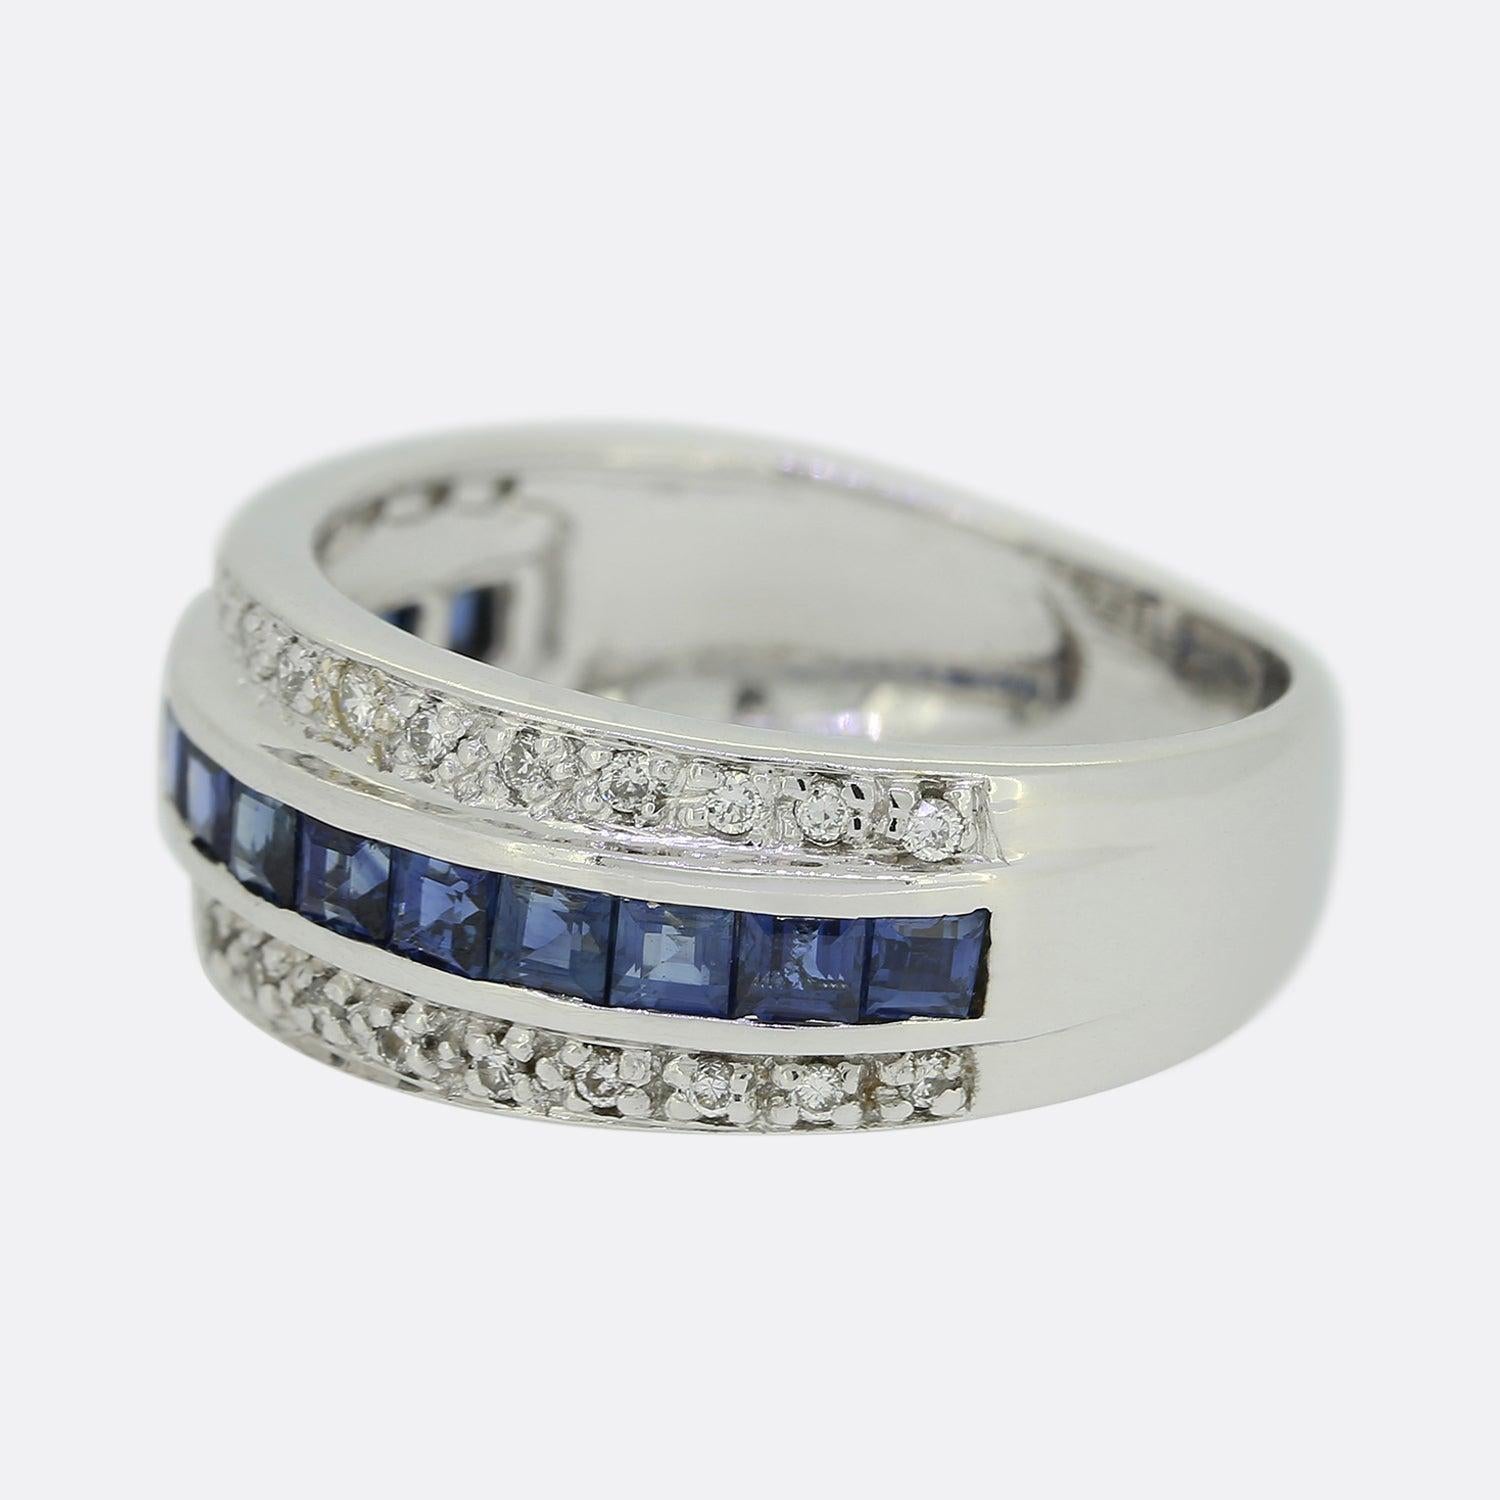 Here we have a lovely sapphire and diamond ring. Crafted from 18ct white gold, this vintage piece showcases a mid section of channel set square shaped sapphires which are complimented above and below by a single row of eight cut diamonds.